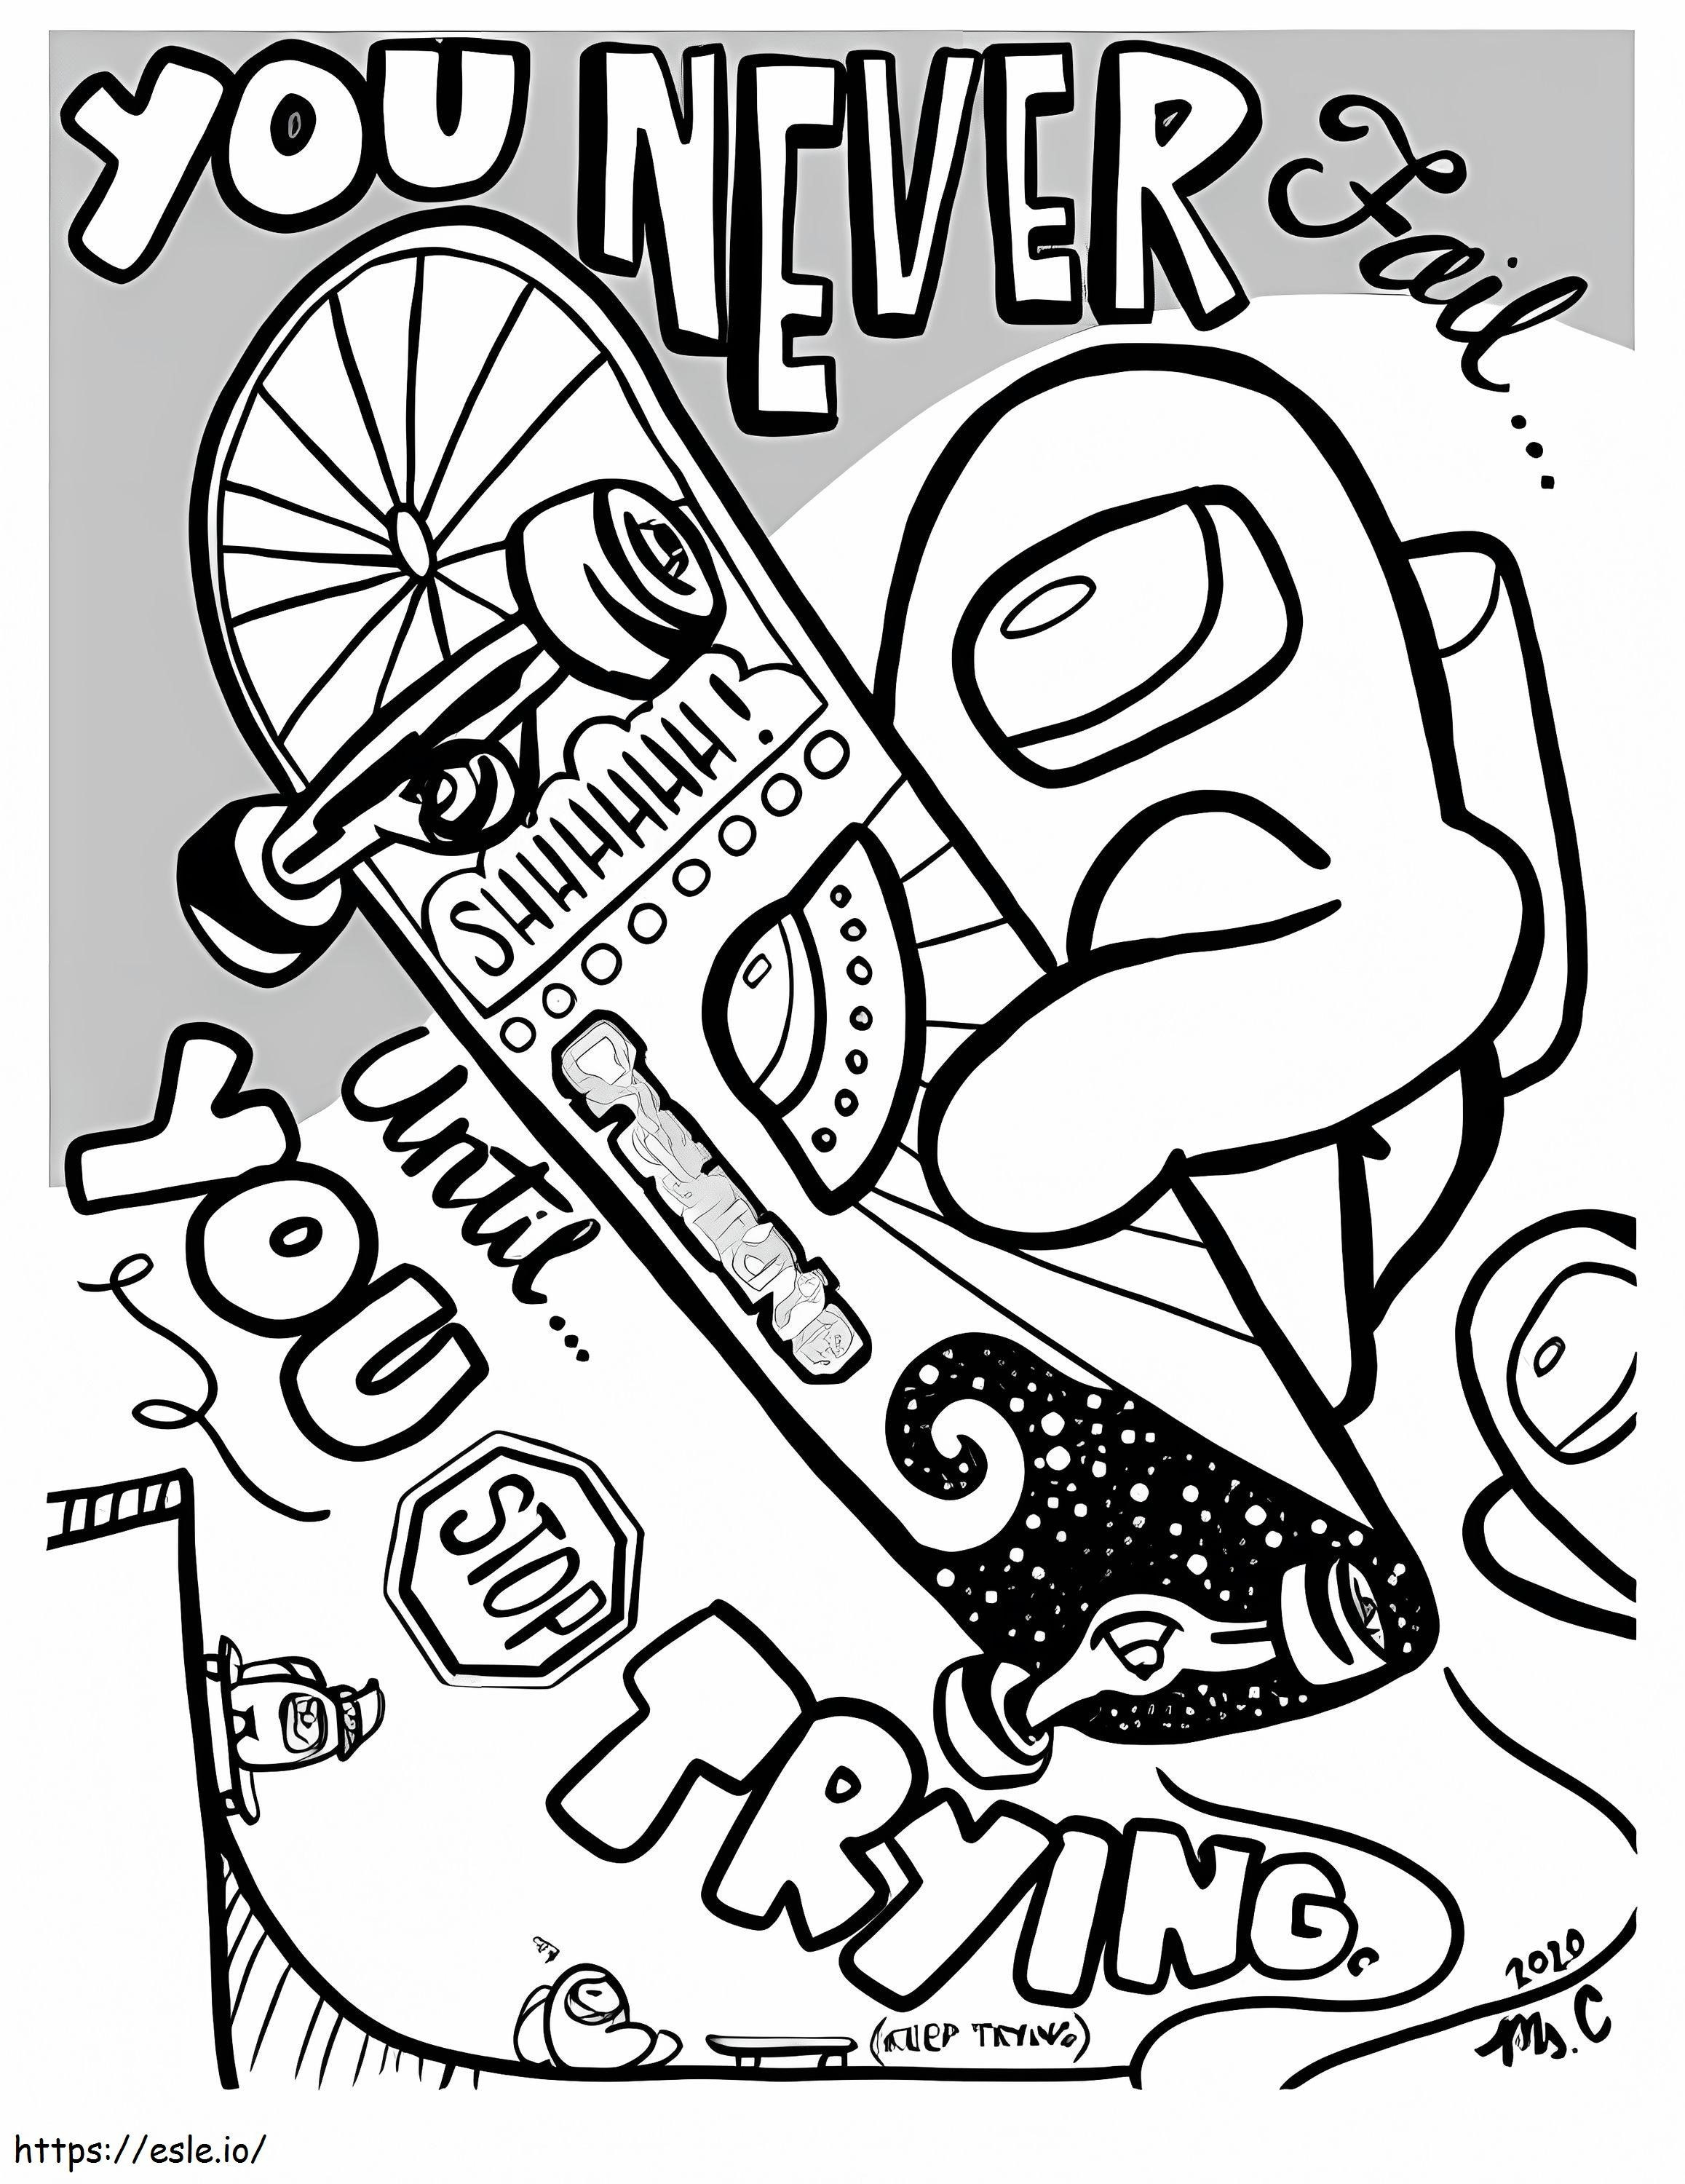 Skate Board Among Us coloring page